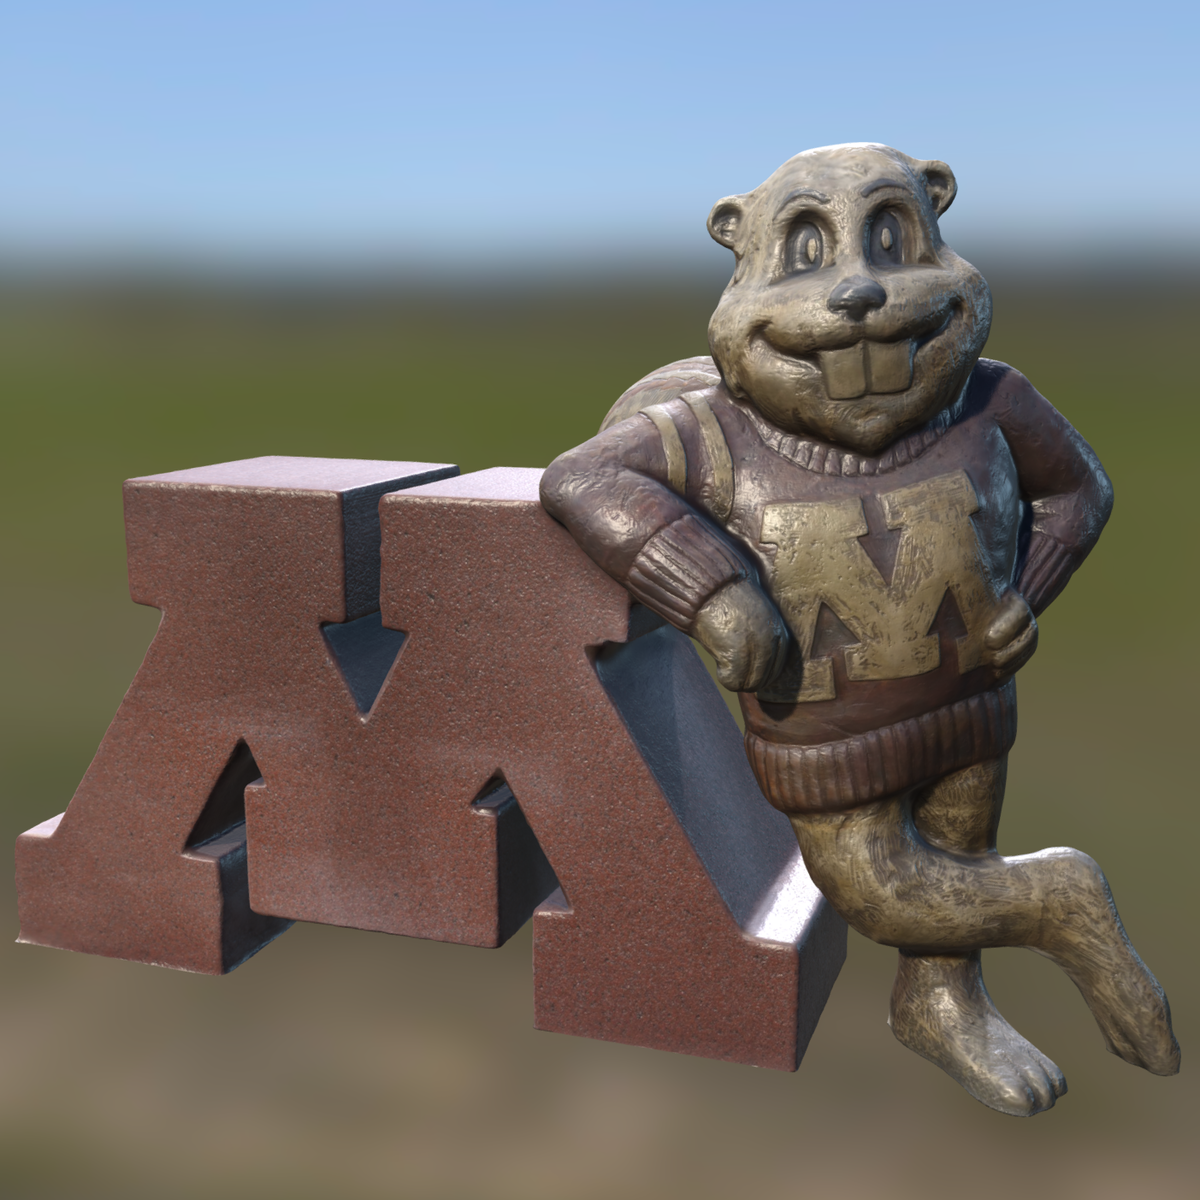 3D model of a statue of Goldy Gopher.